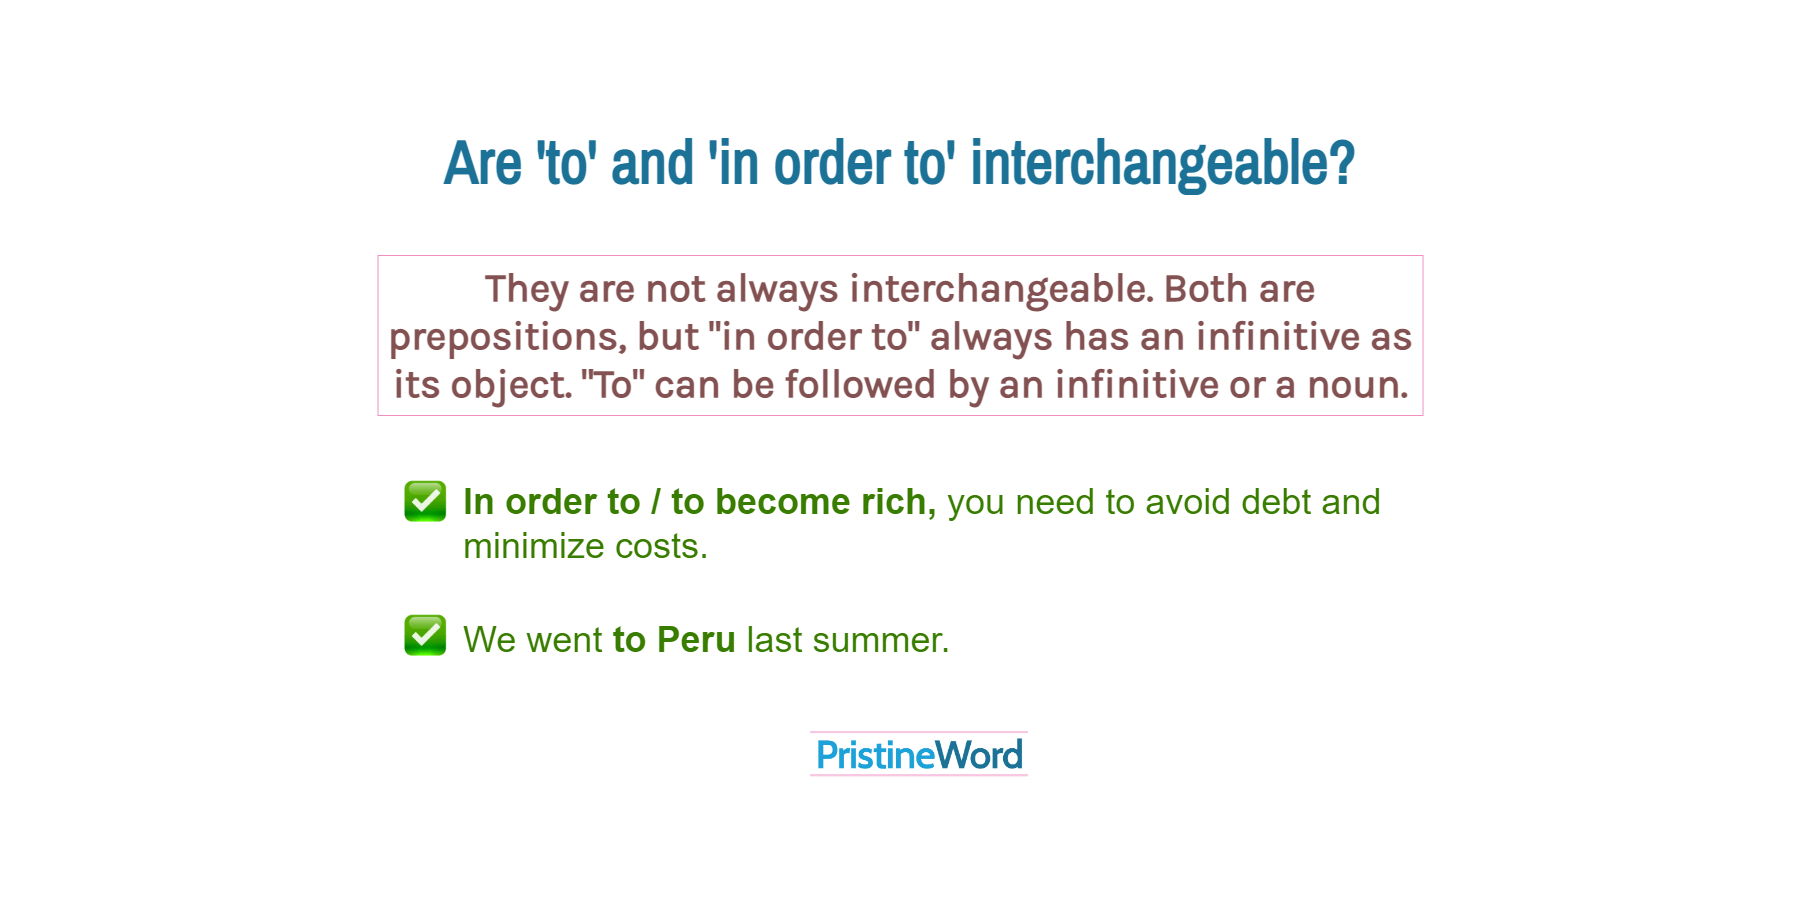 Are 'To' and 'In order to' interchangeable?